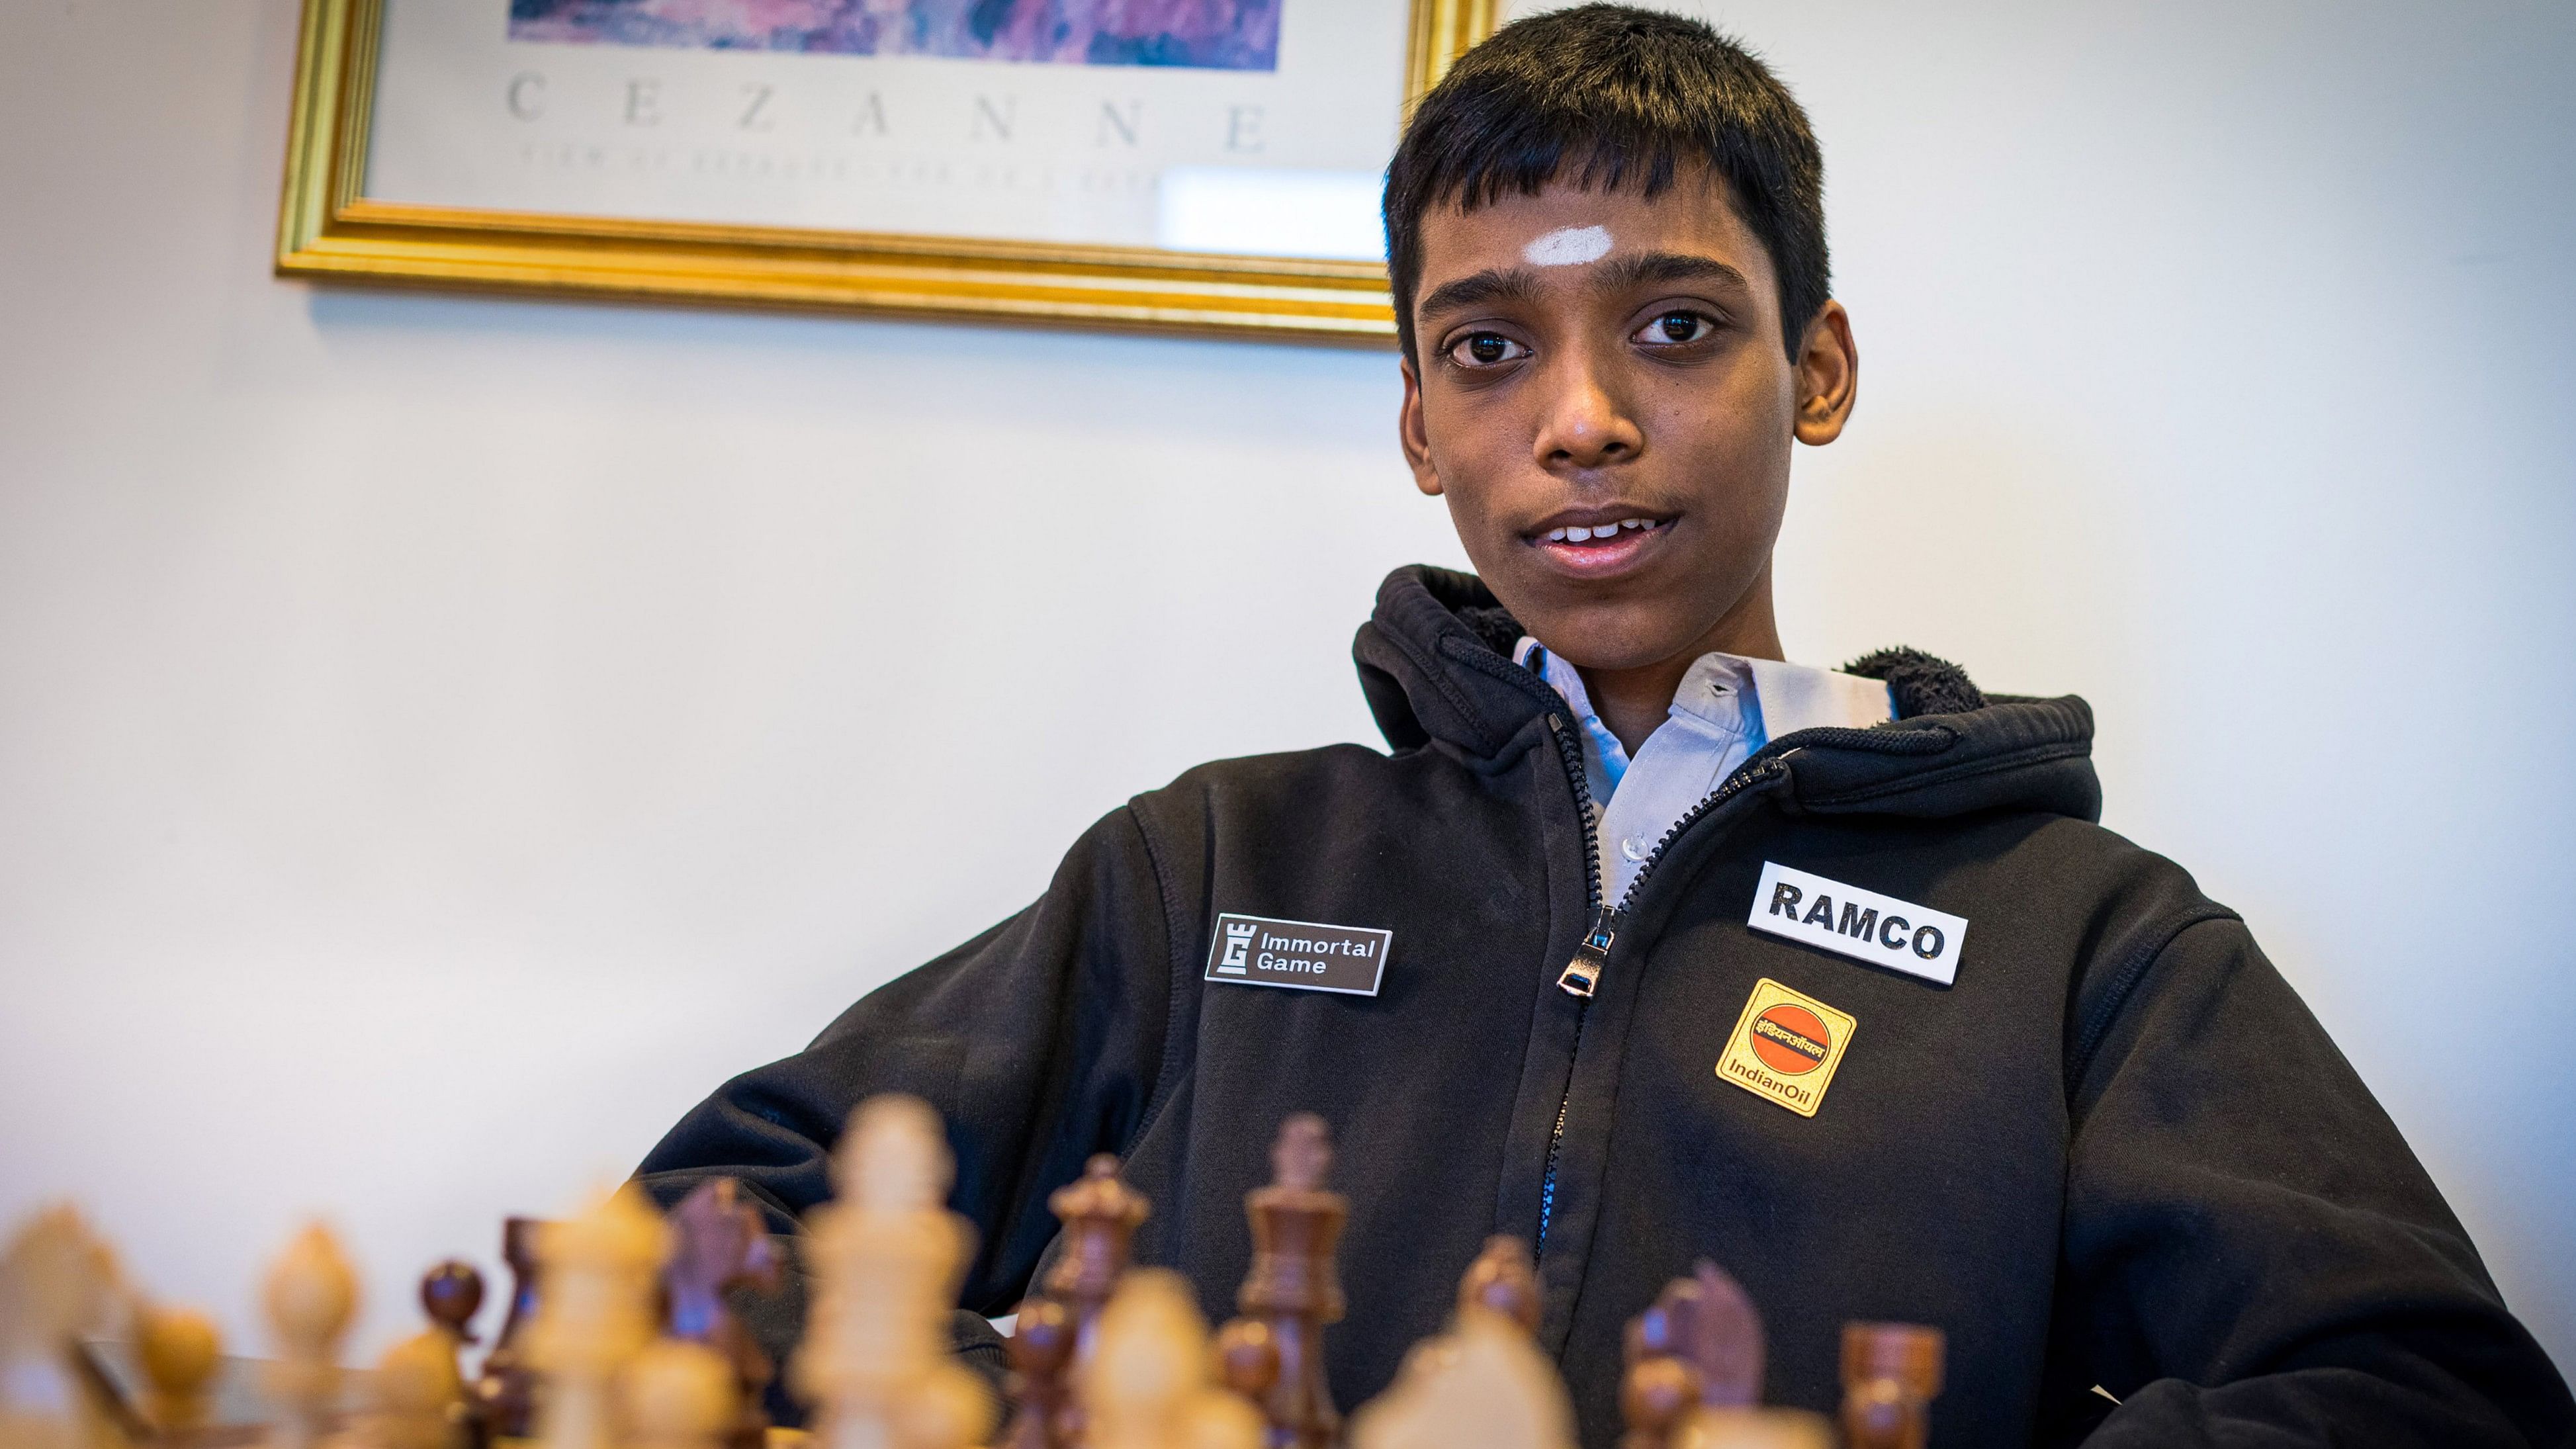 UPSC LEGENDS on Instagram: At 12 years and 10 months, Chennai-based R  Praggnanandhaa is not yet a teenager but he is already a Grandmaster, the  highest title a chess player can attain. .